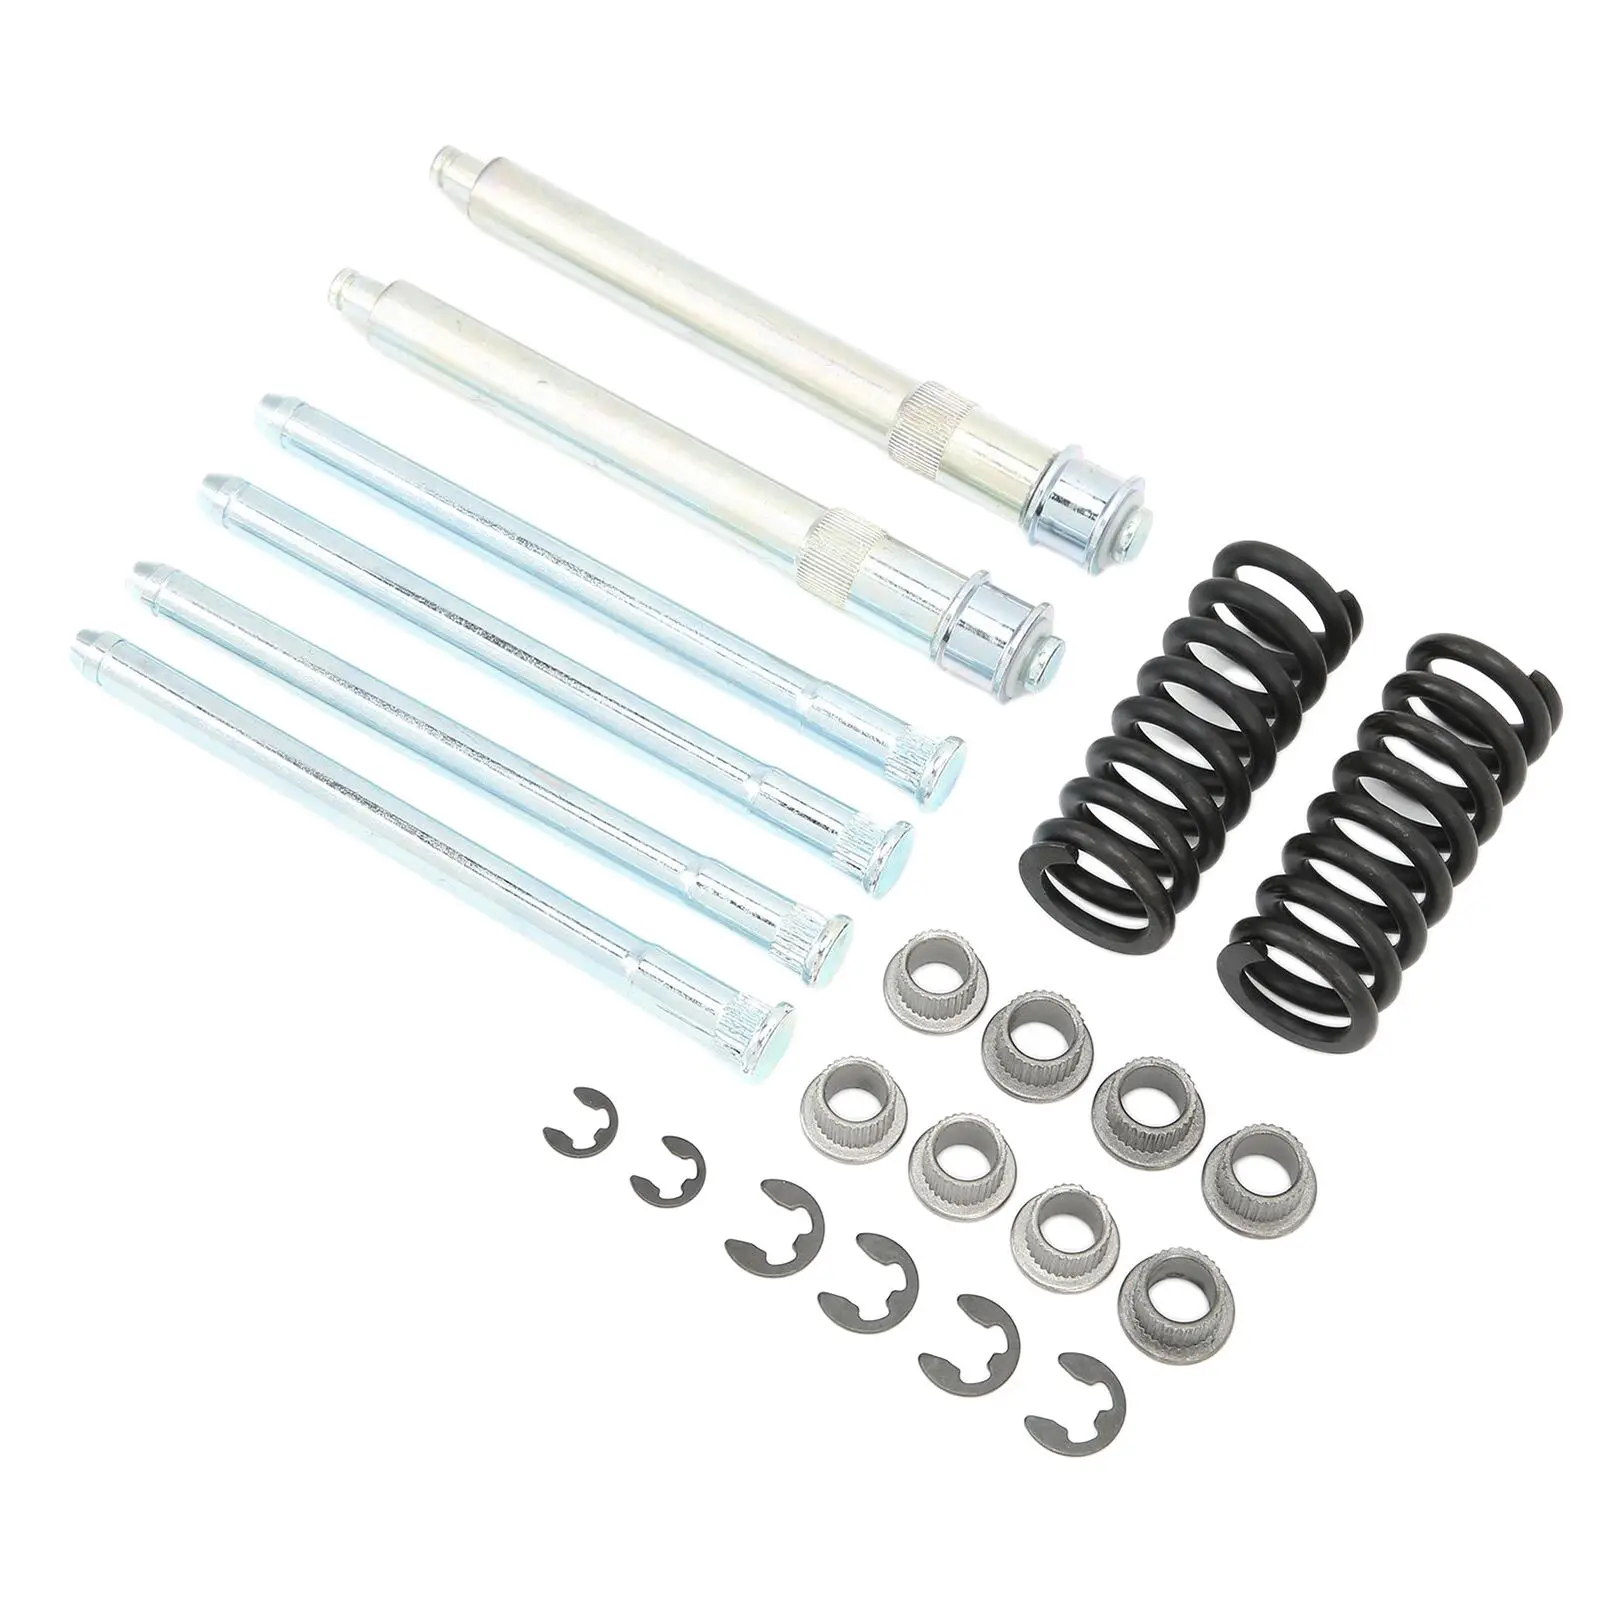 Door Hinge Pin Bushing Kit Door Hinge Pin and Spring with Bushing Kit Fits for Chevy GMC SUV Replace